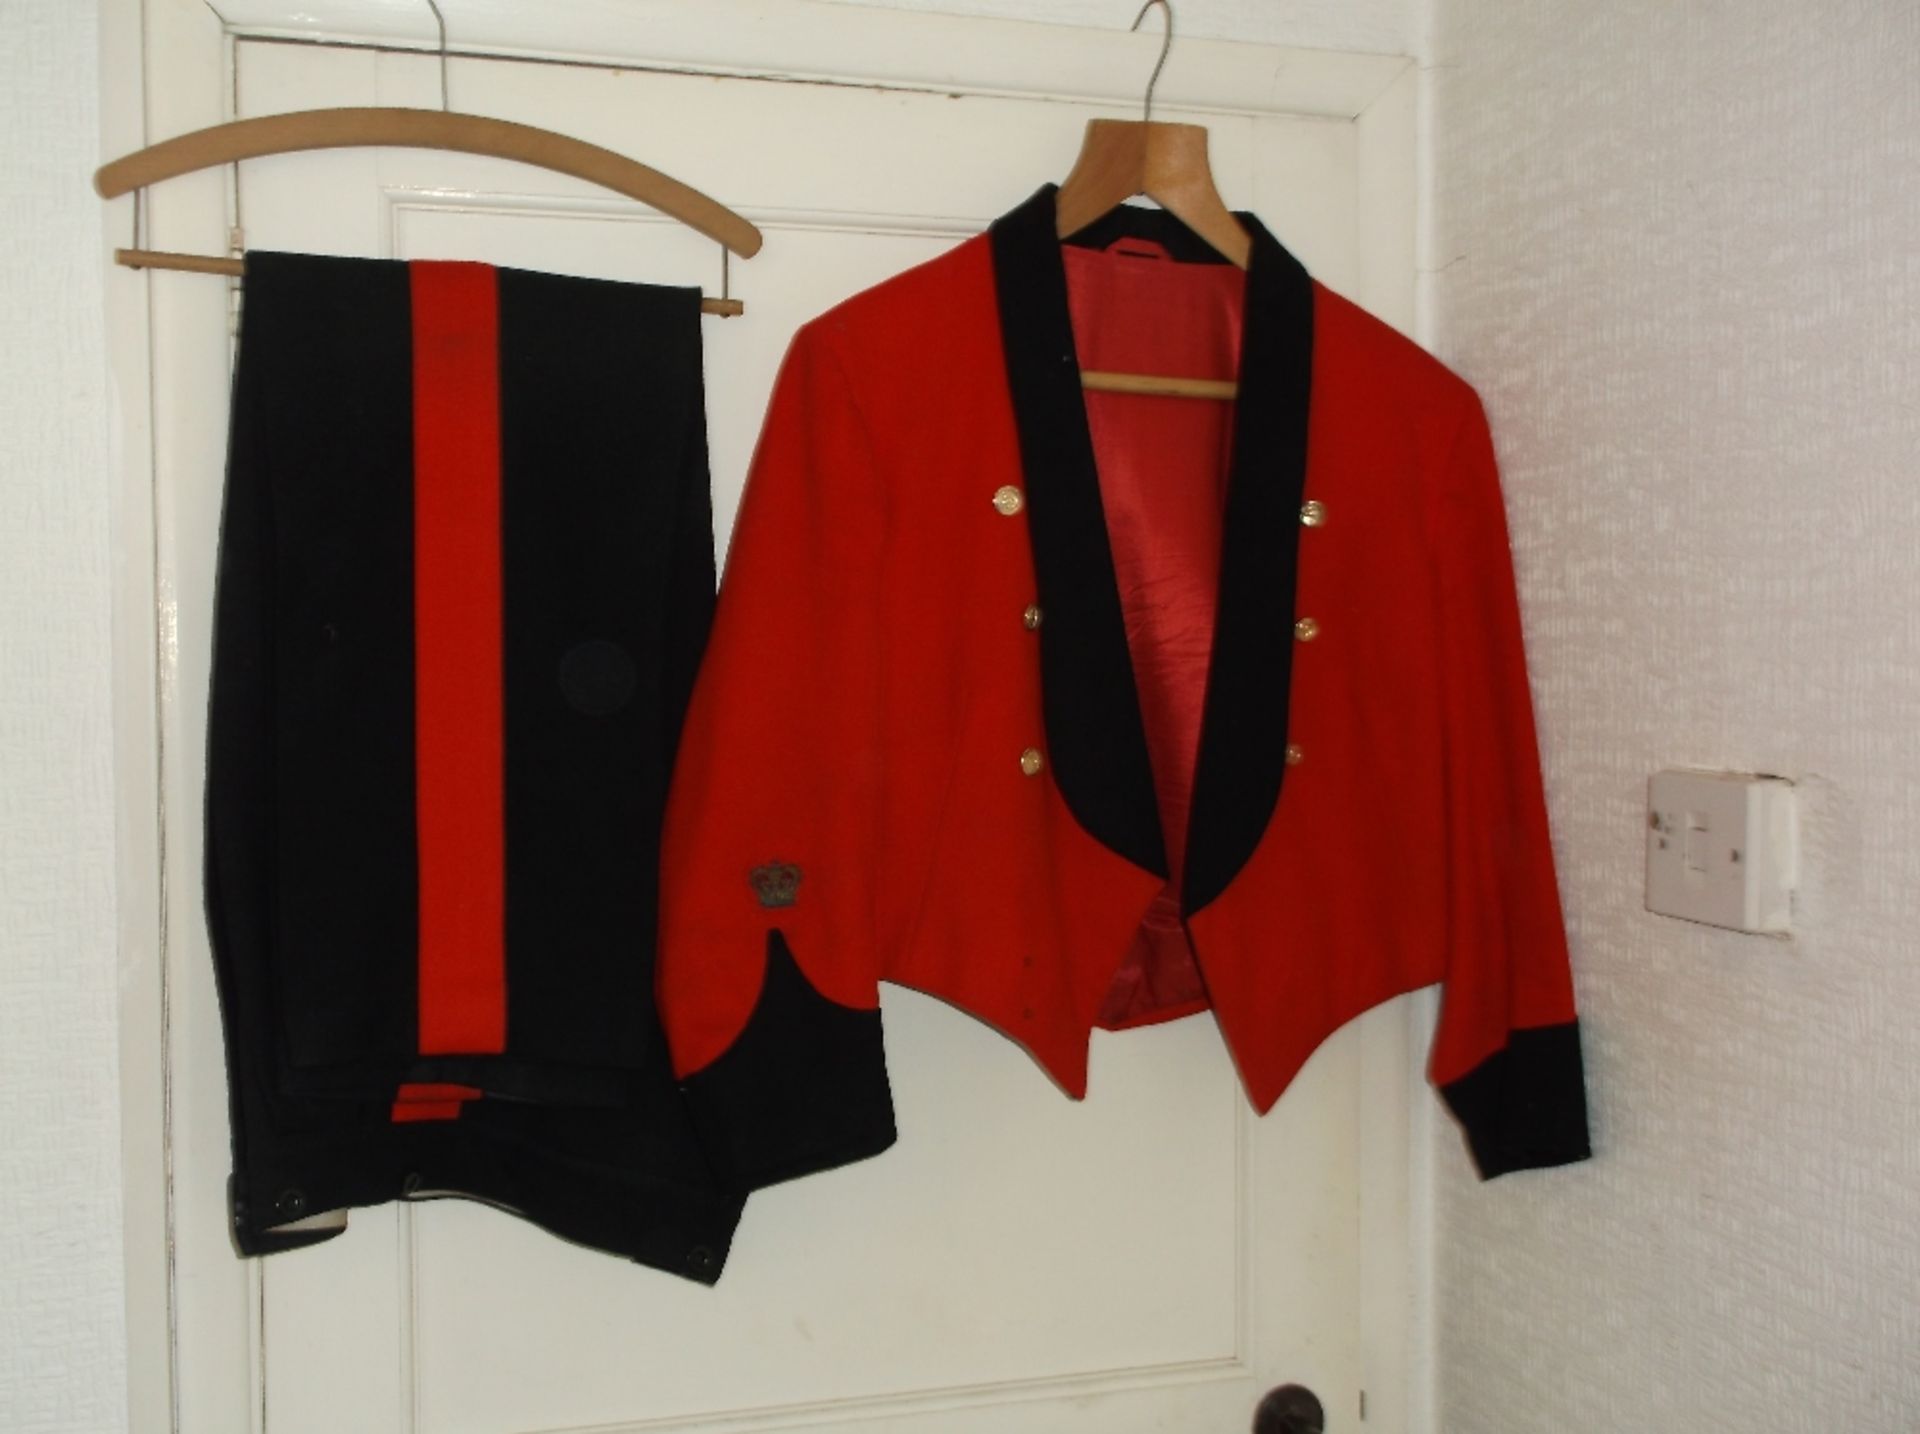 Red and black Royal Signals livery jacket with brass buttons and crest on the sleeves, and matching